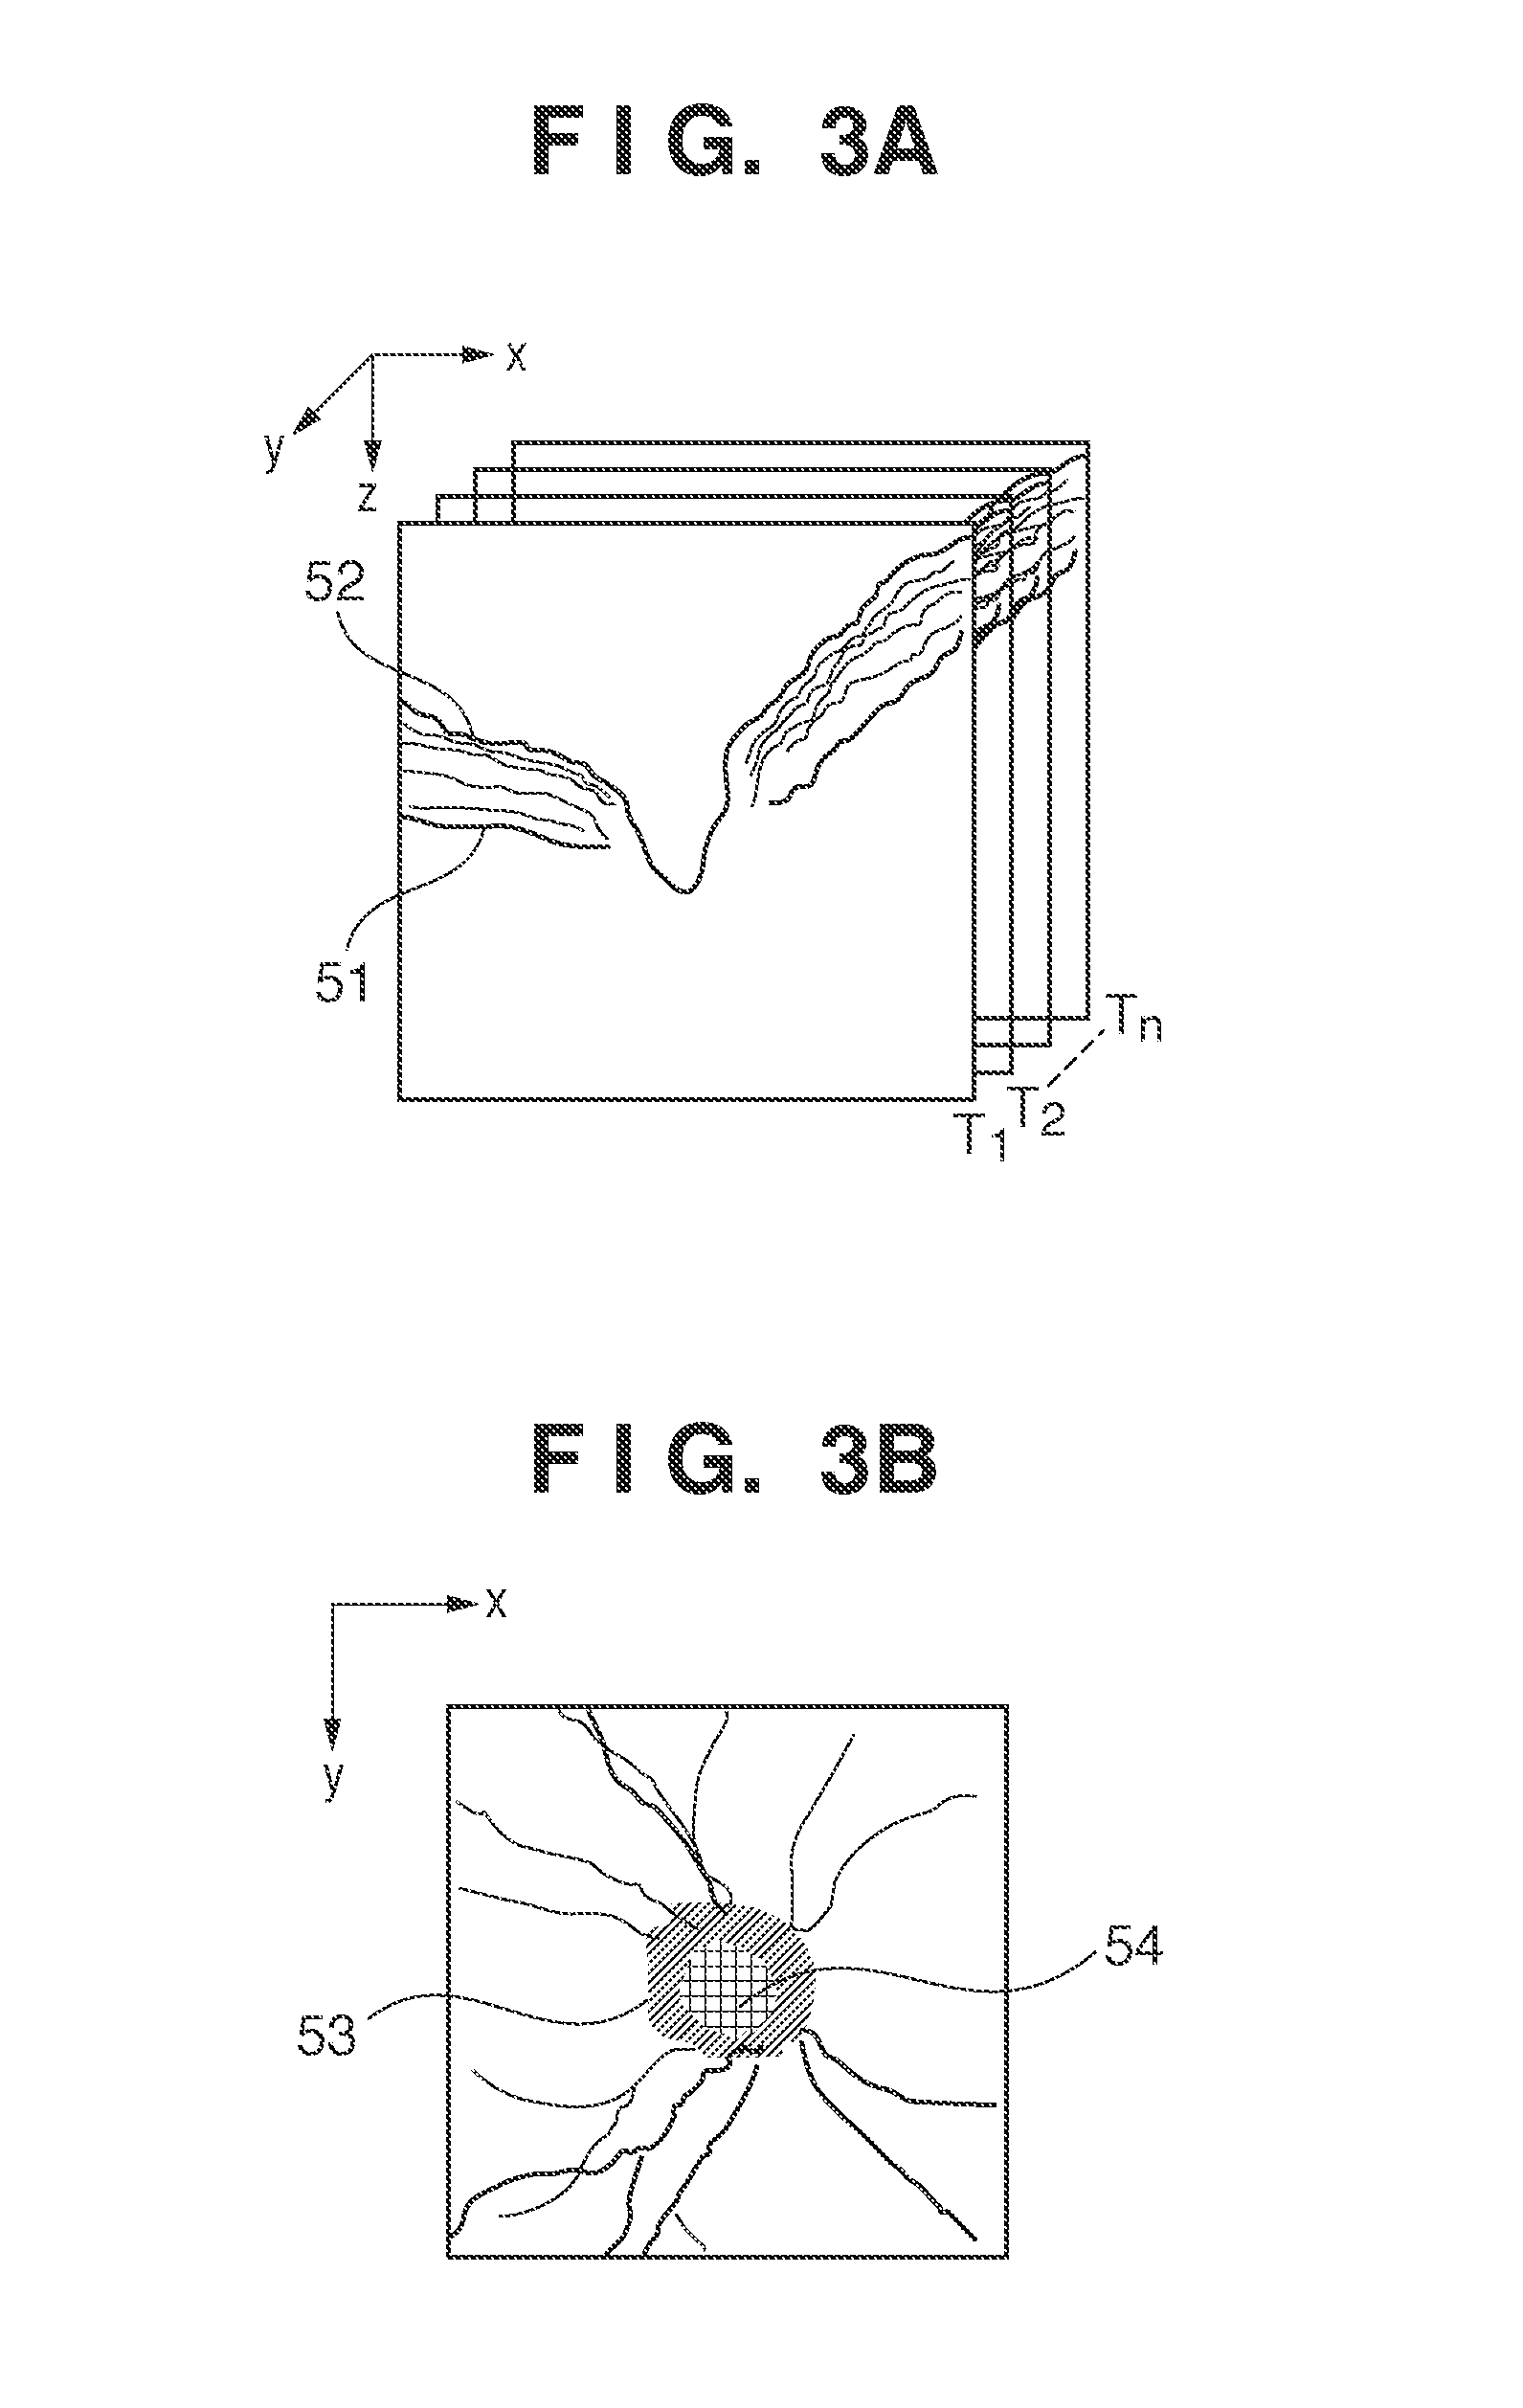 Tomogram observation apparatus, processing method, and non-transitory computer-readable storage medium